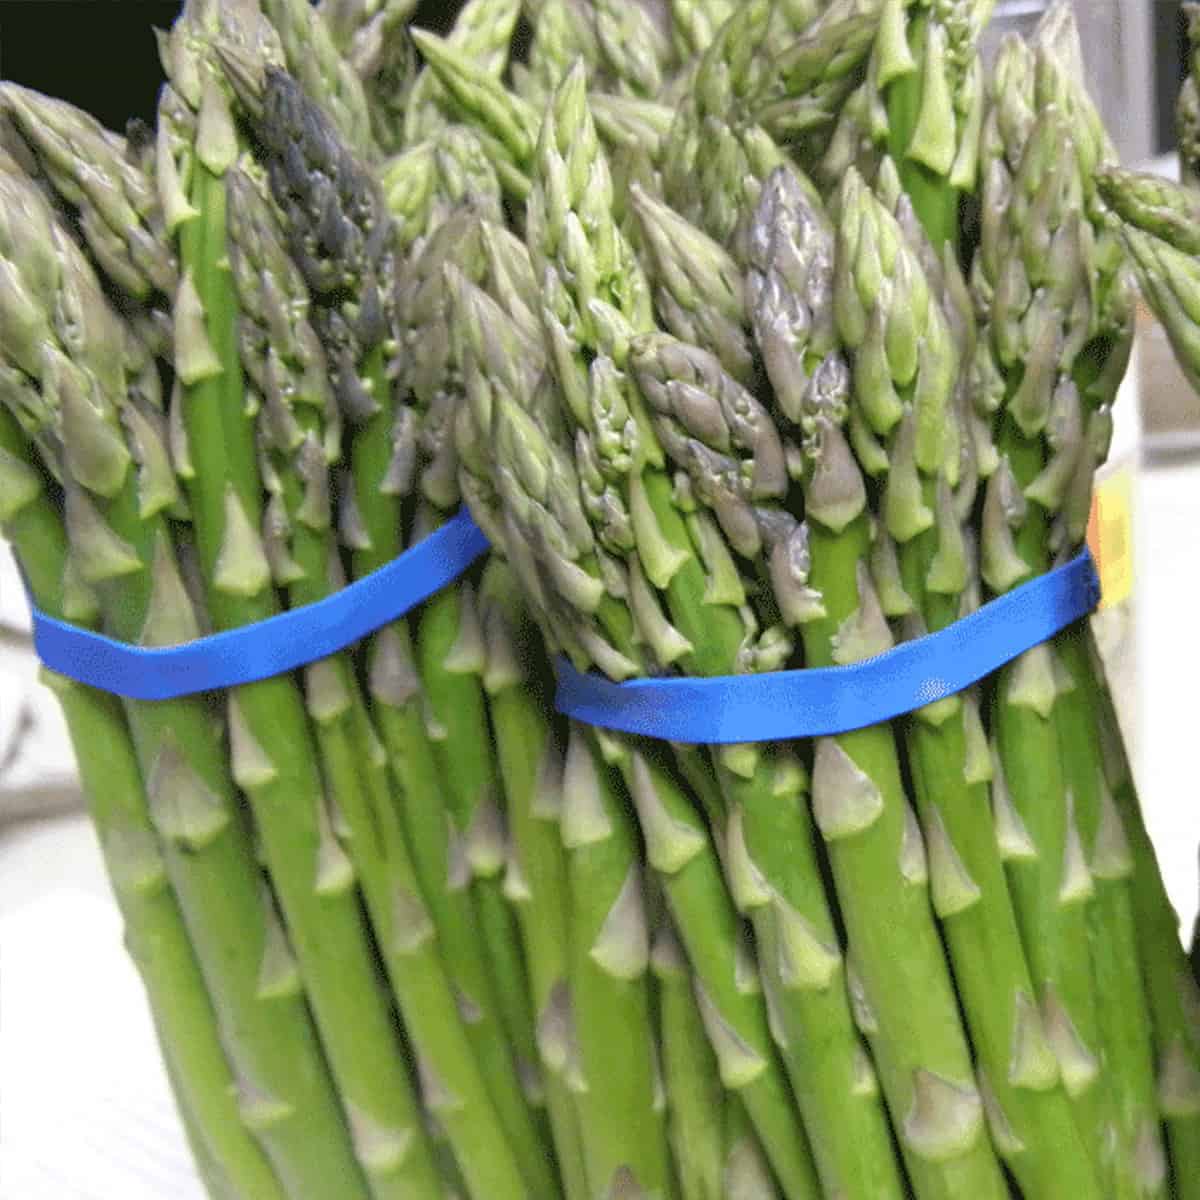 How to Dehydrate Asparagus Spears